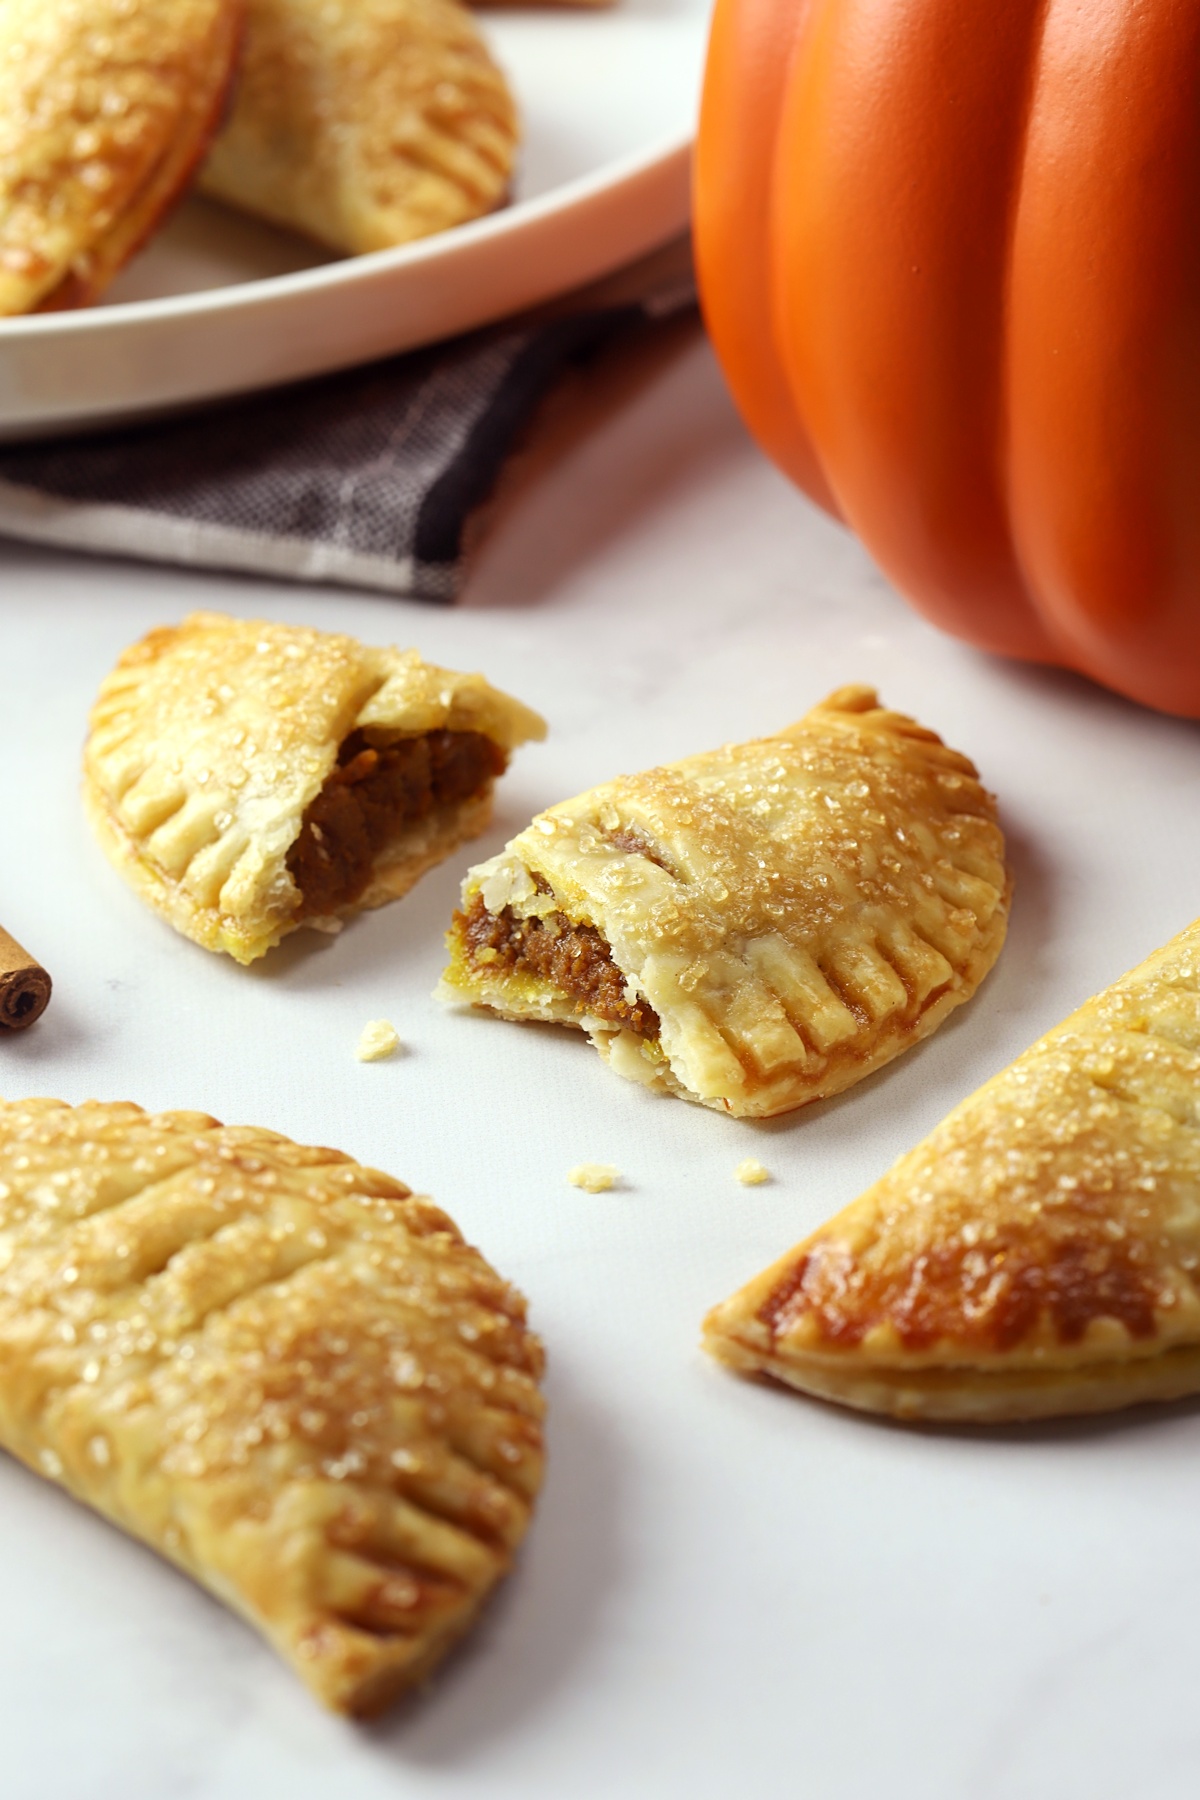 Pumpkin turnover sliced in half to show filling.